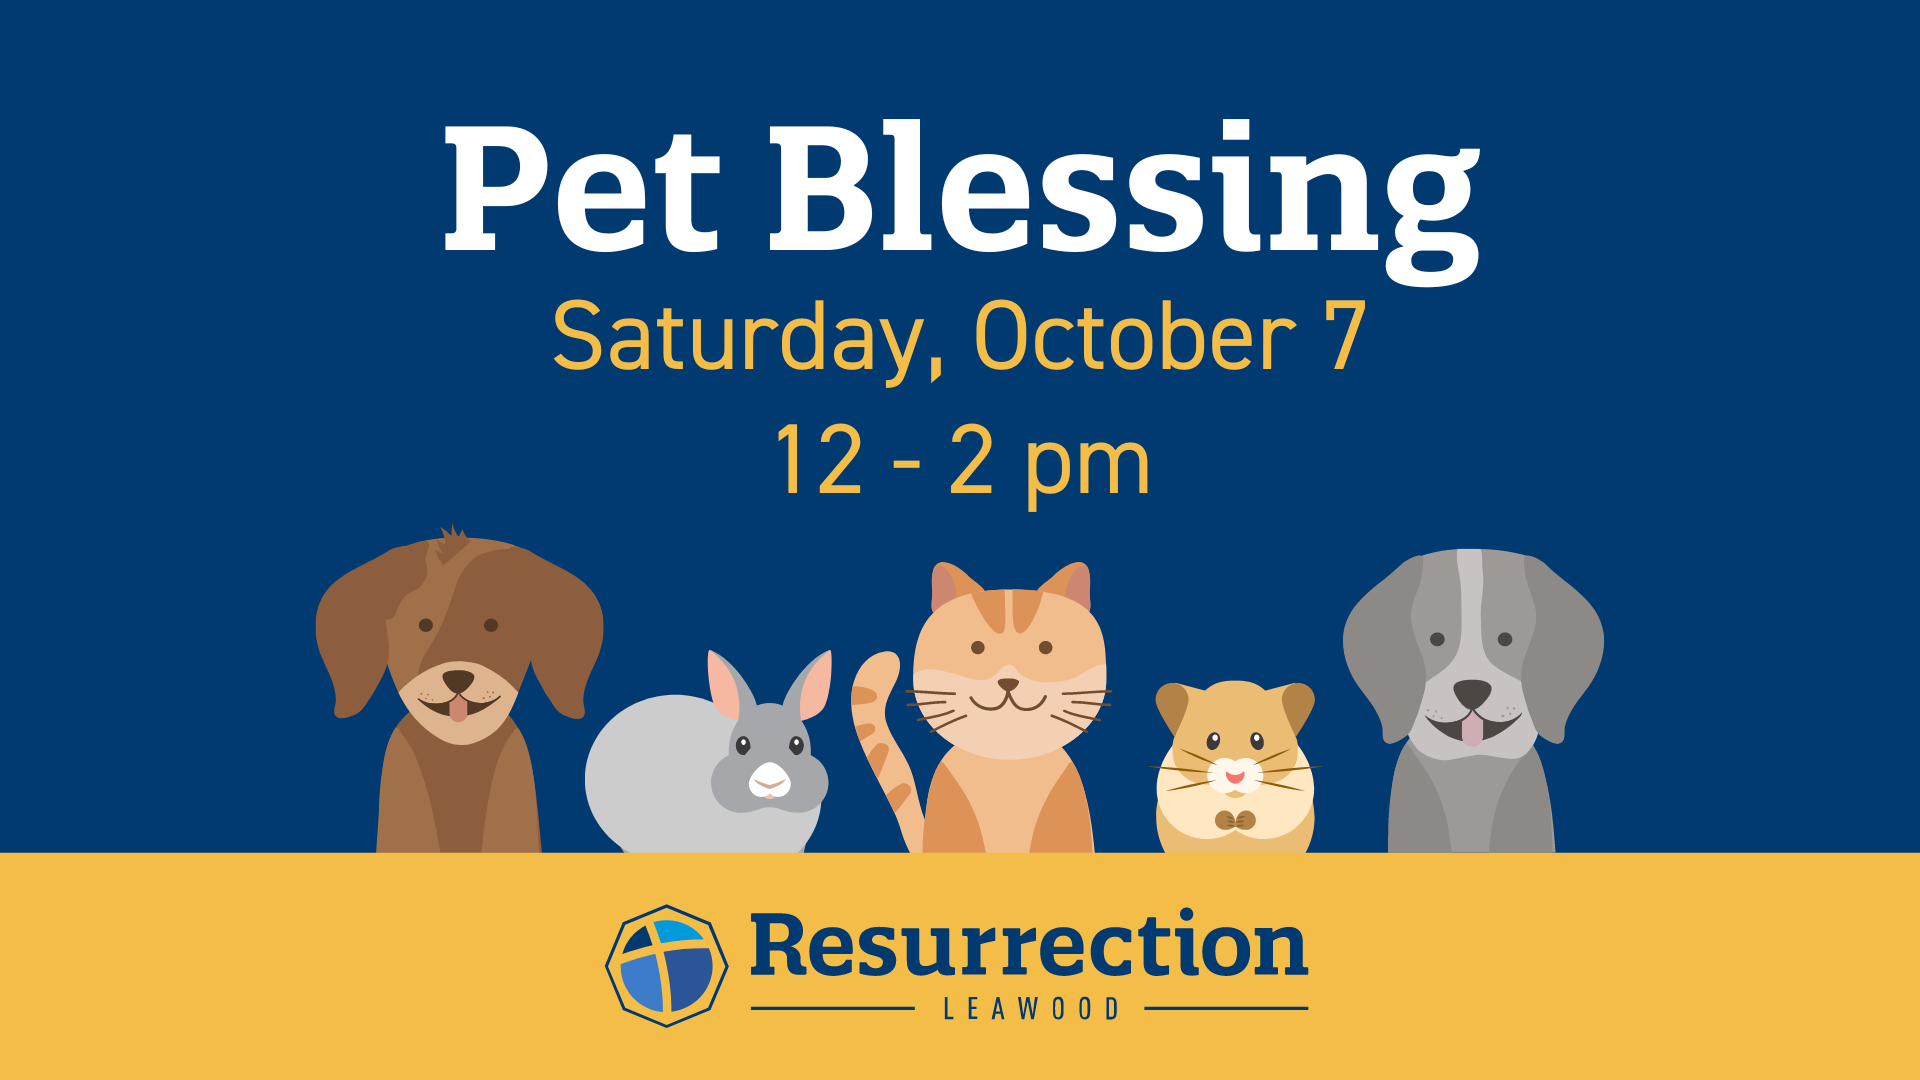 PetBlessing_Leawood_FINAL